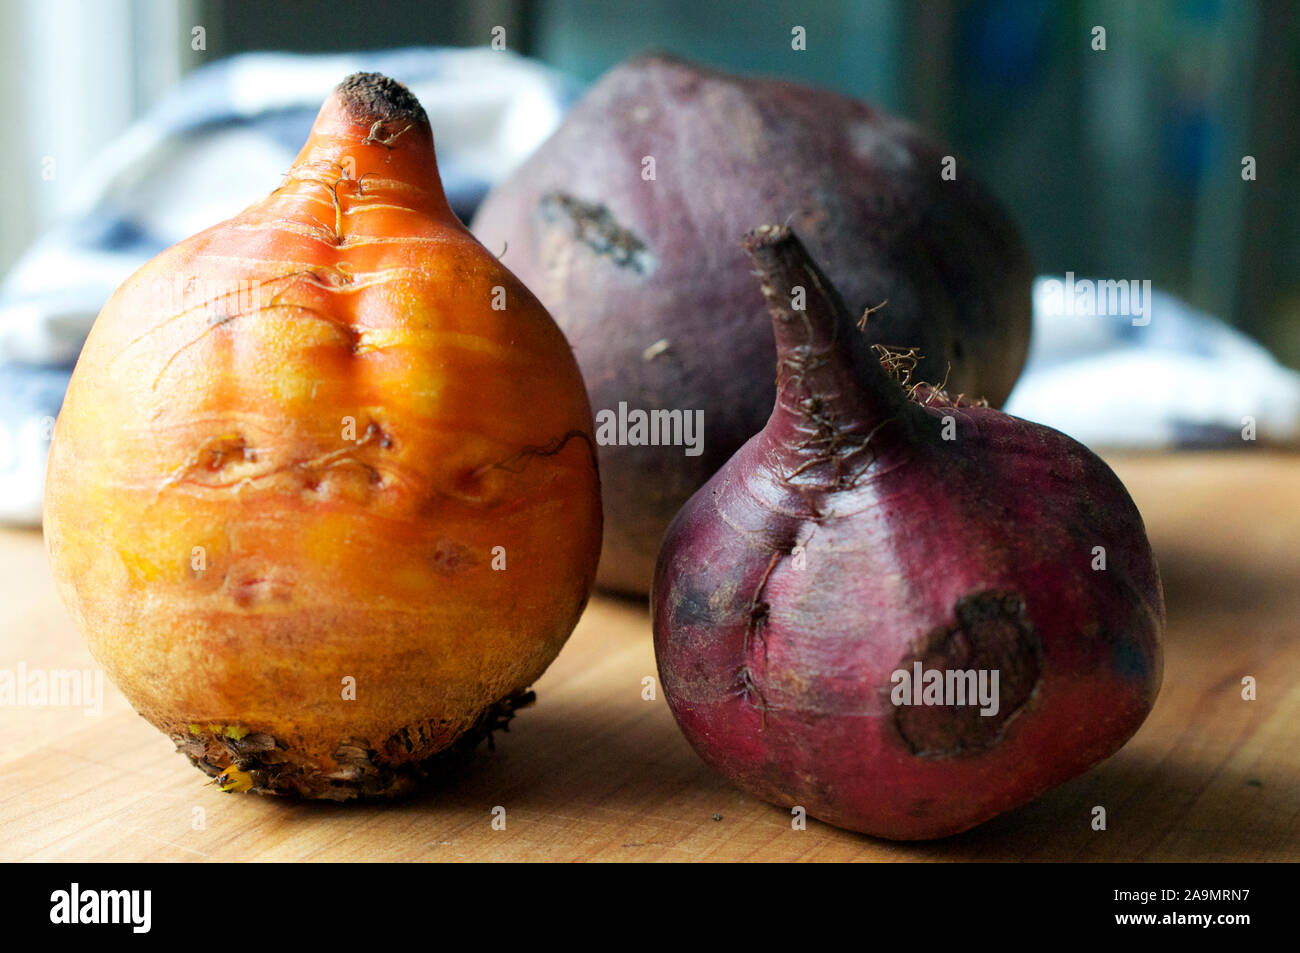 Portrait of Red and Orange Beets on a Wooden Cutting Board Stock Photo